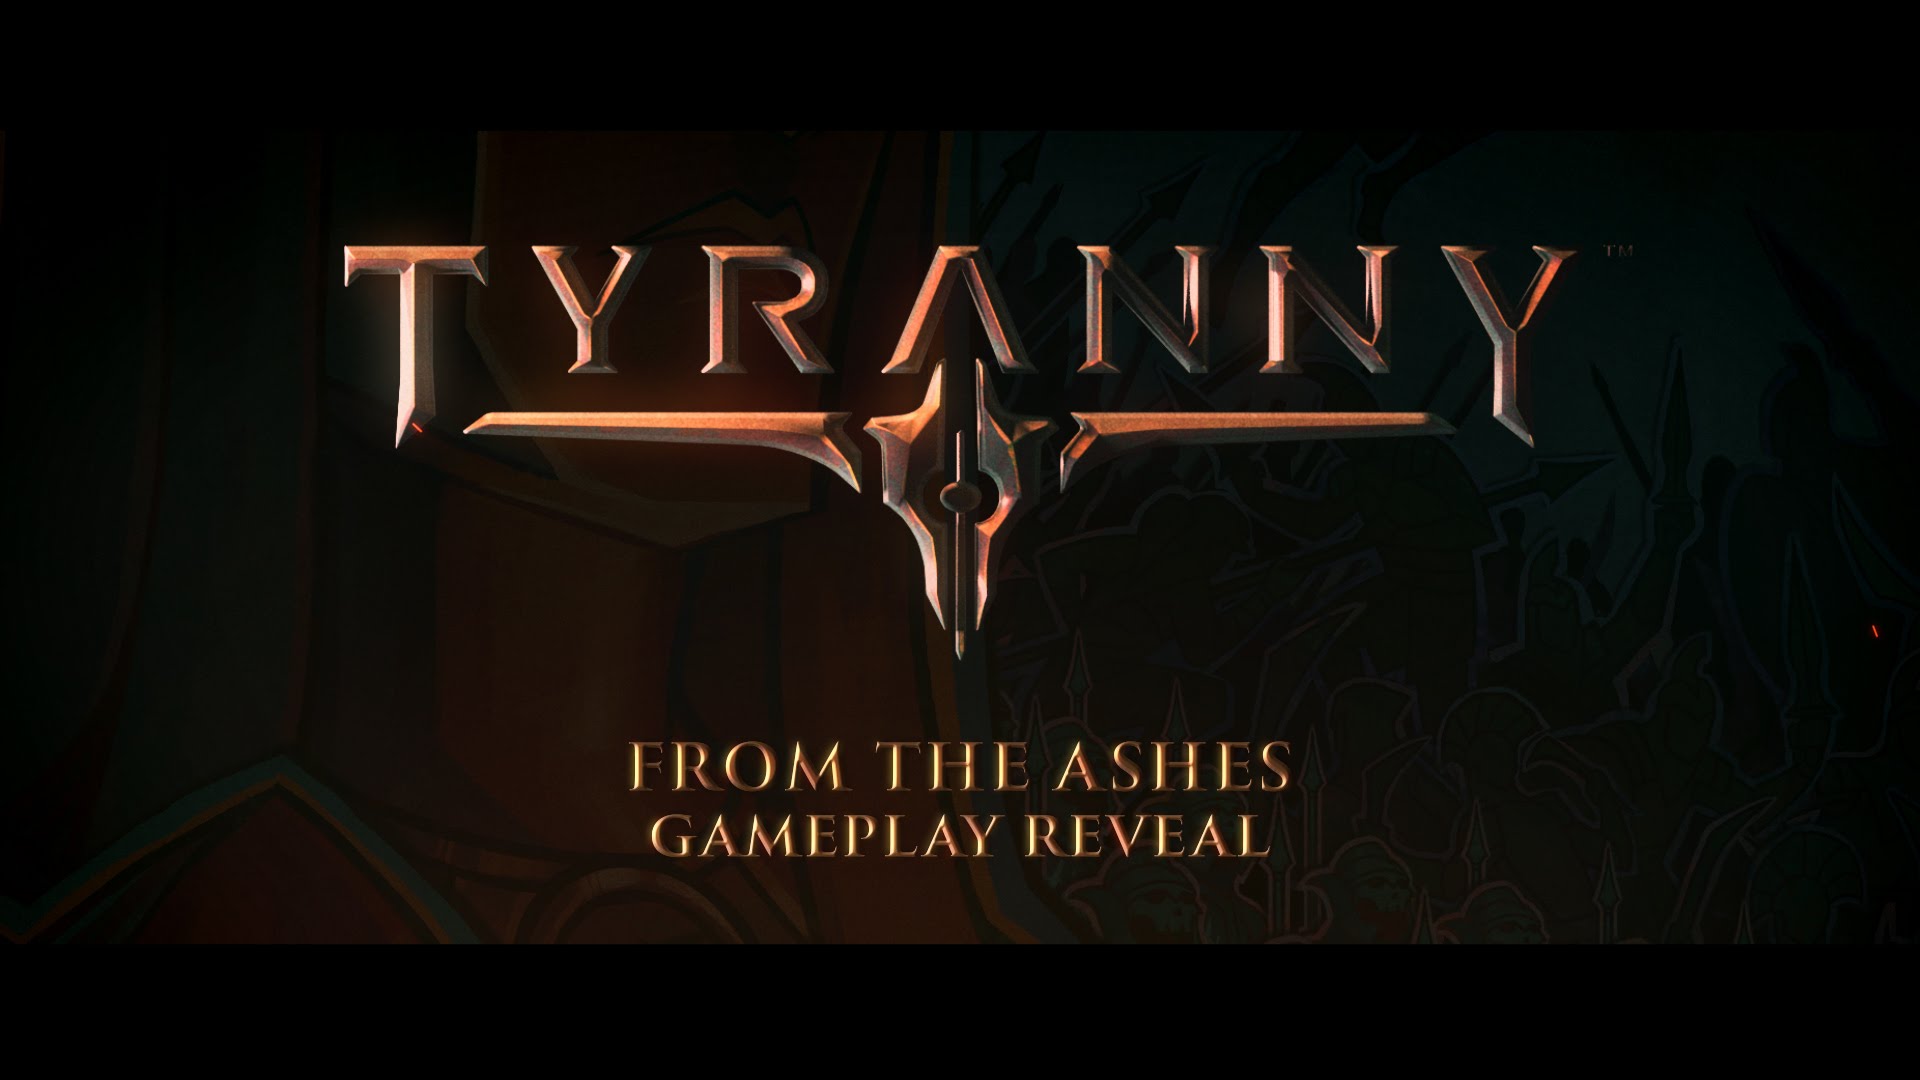 Tyranny - "From the Ashes," Gameplay Reveal - E3 2016